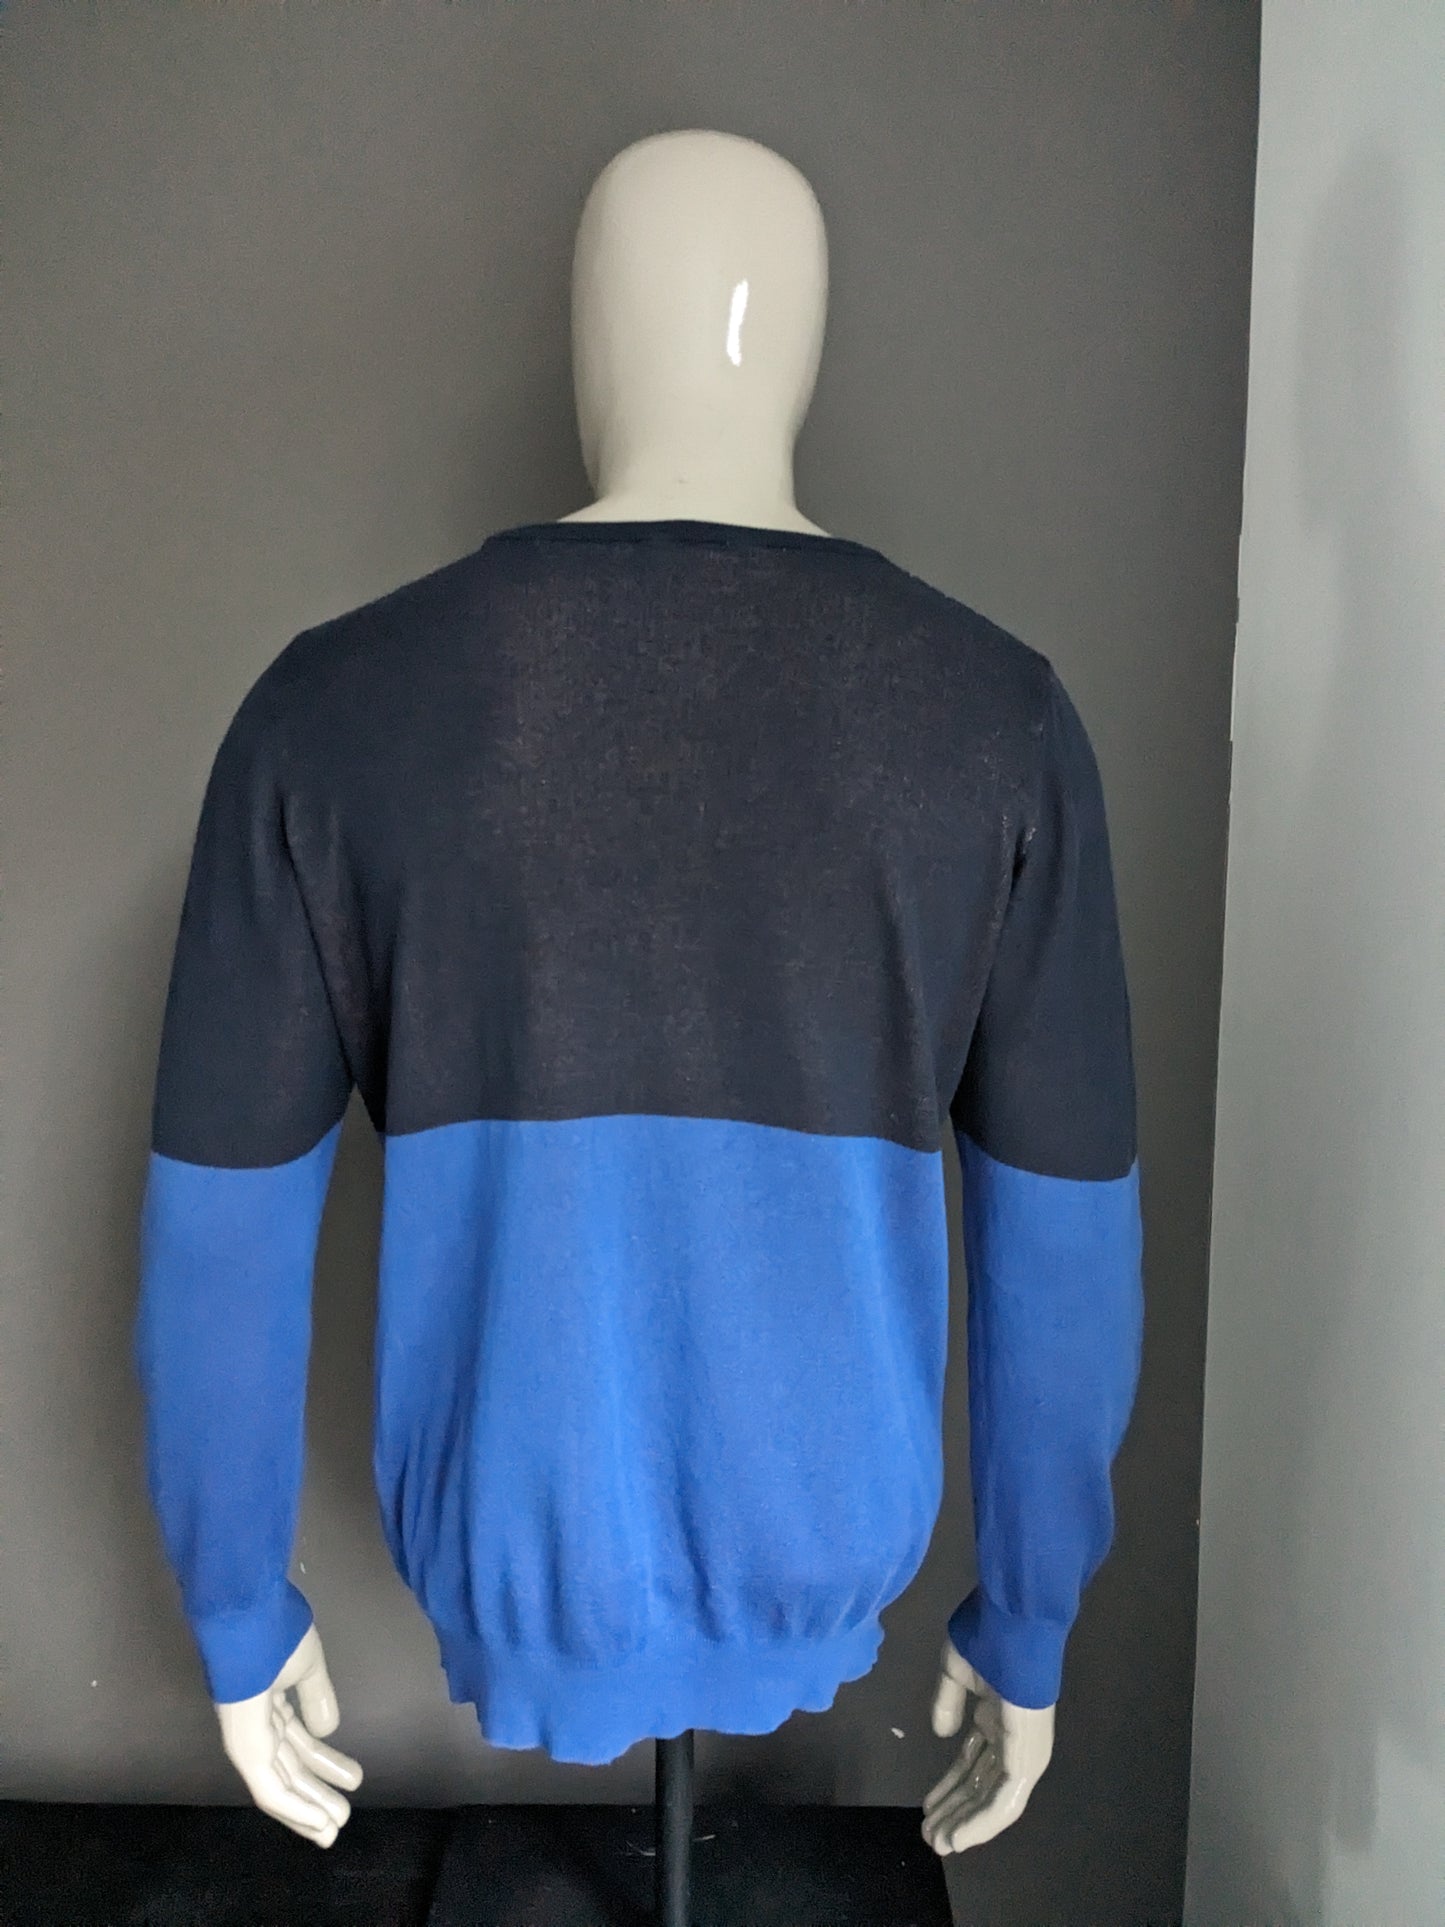 Vintage United Colors or Benetton sweater. Blue white orange colored. Size L.